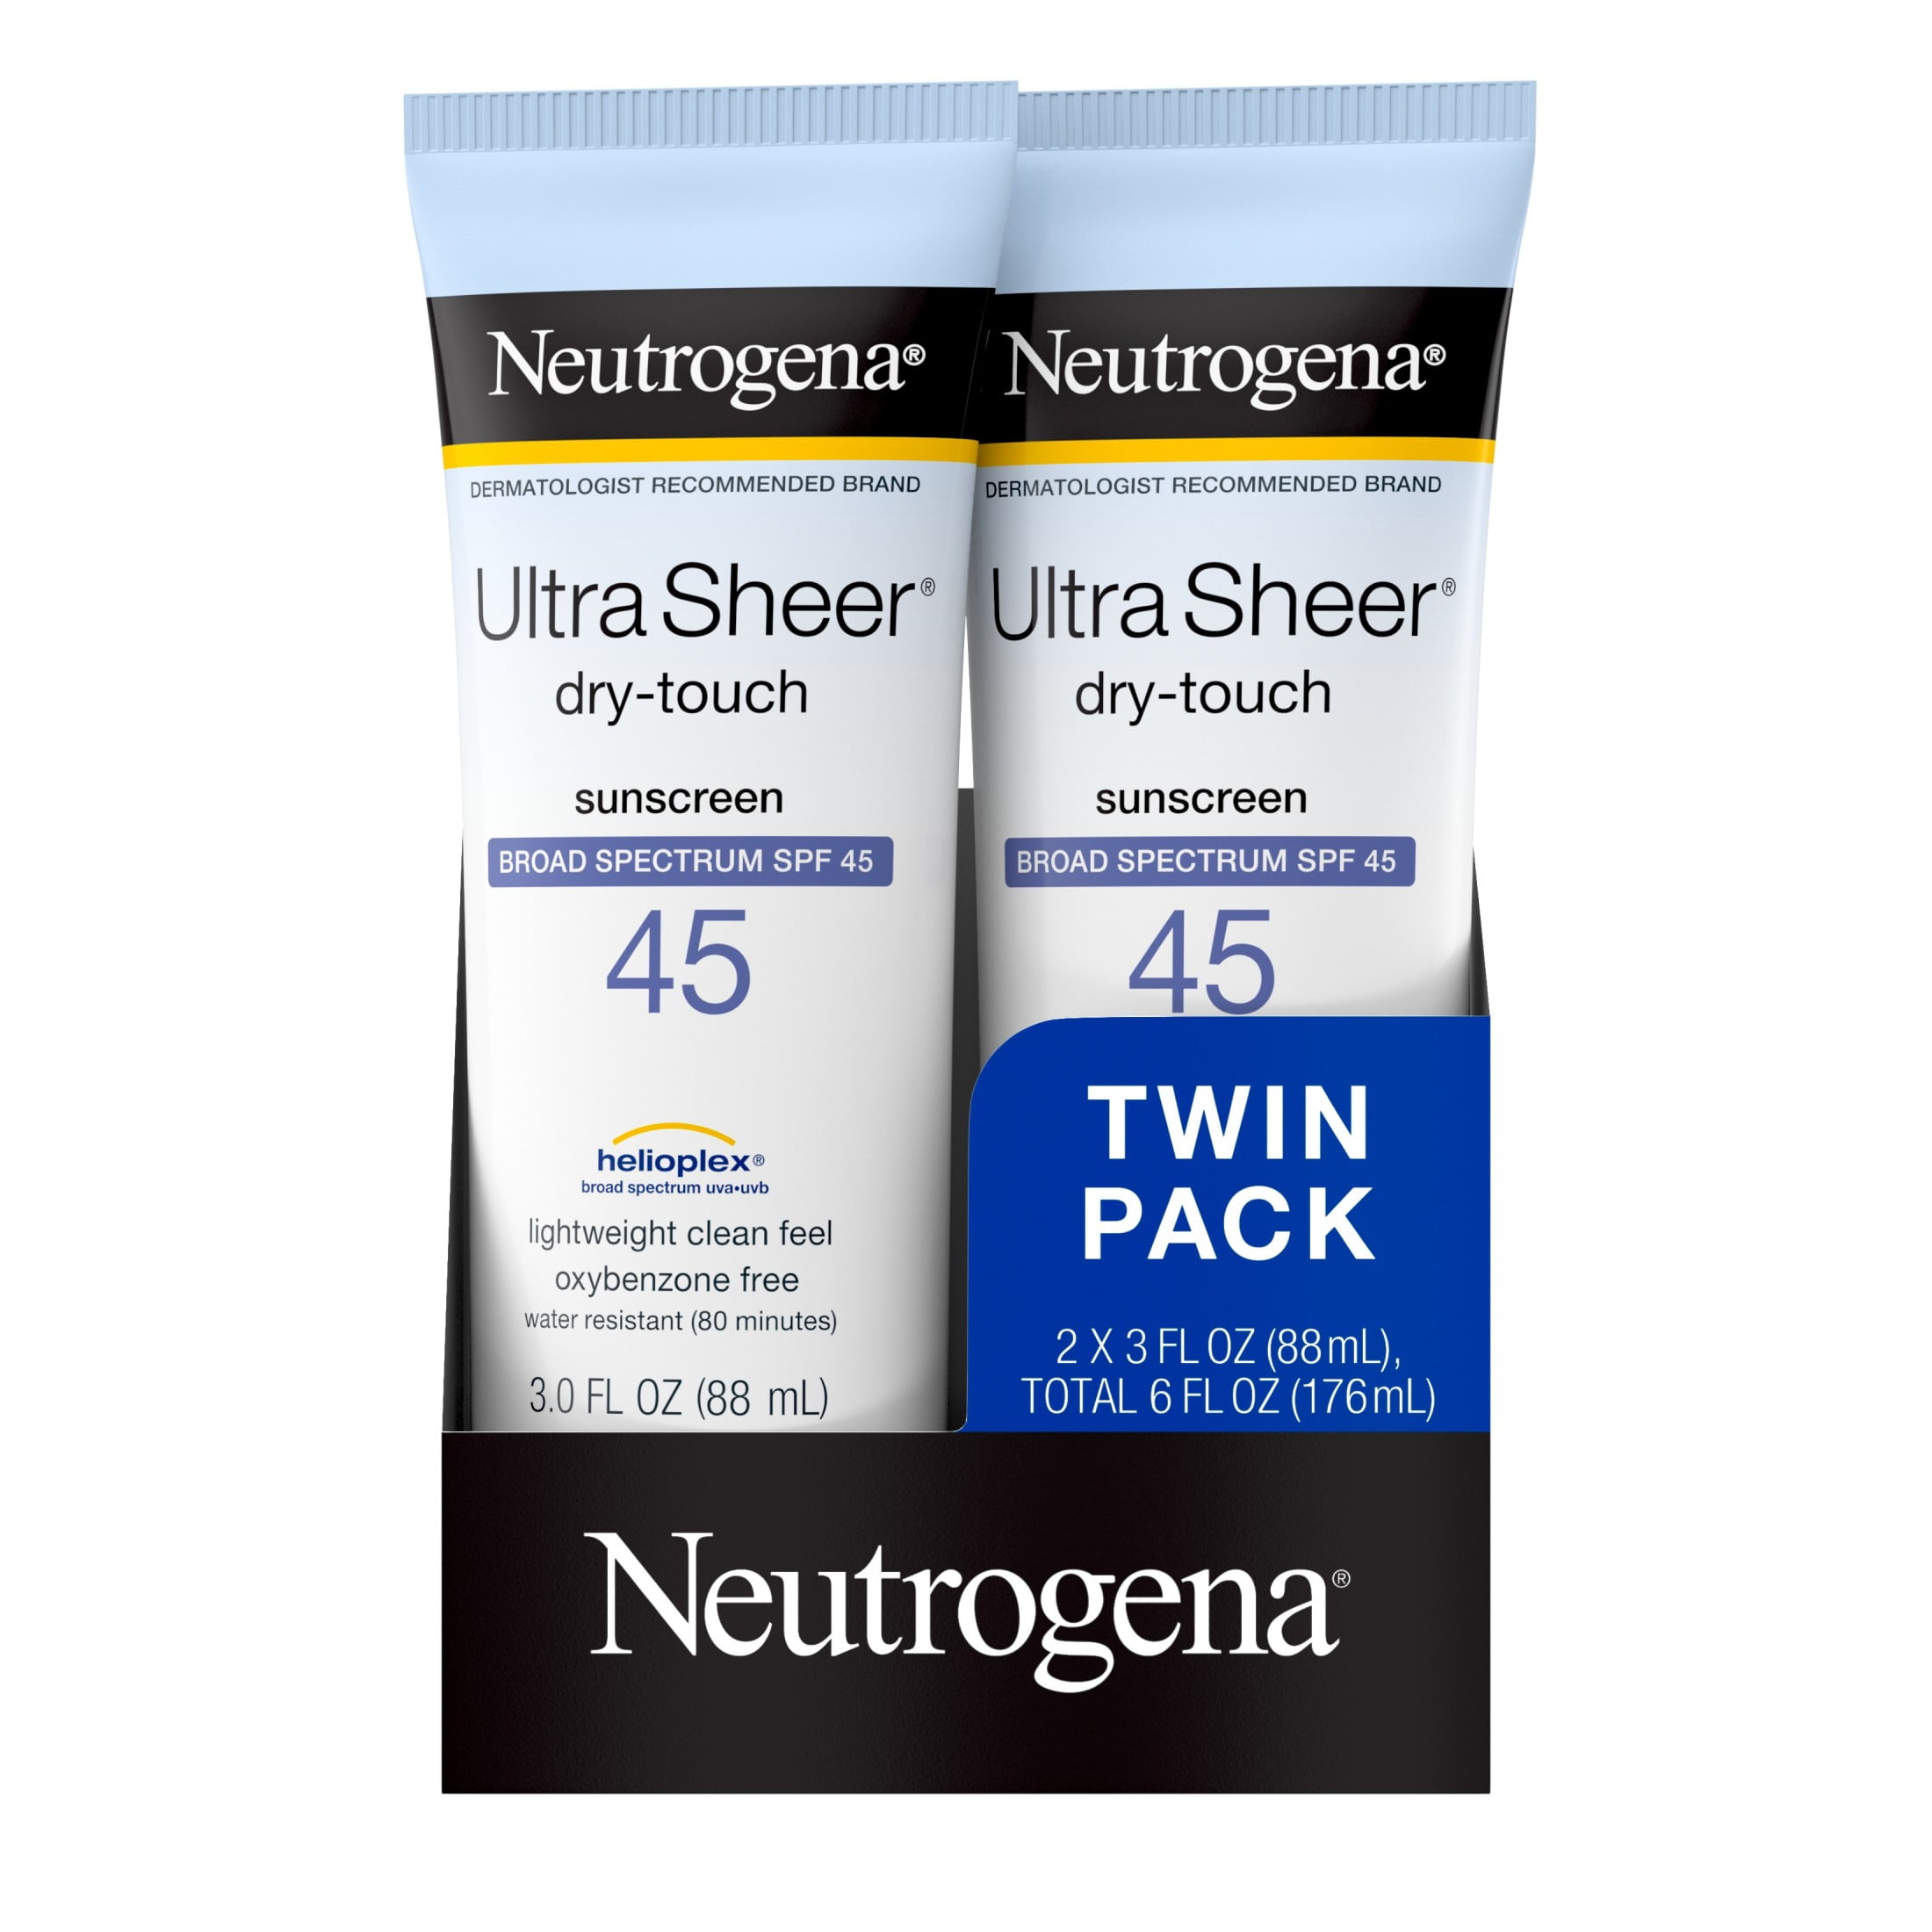 Neutrogena Ultra Sheer Dry-Touch Water Resistant and Non-Greasy Sunscreen  Lotion with Broad Spectrum SPF